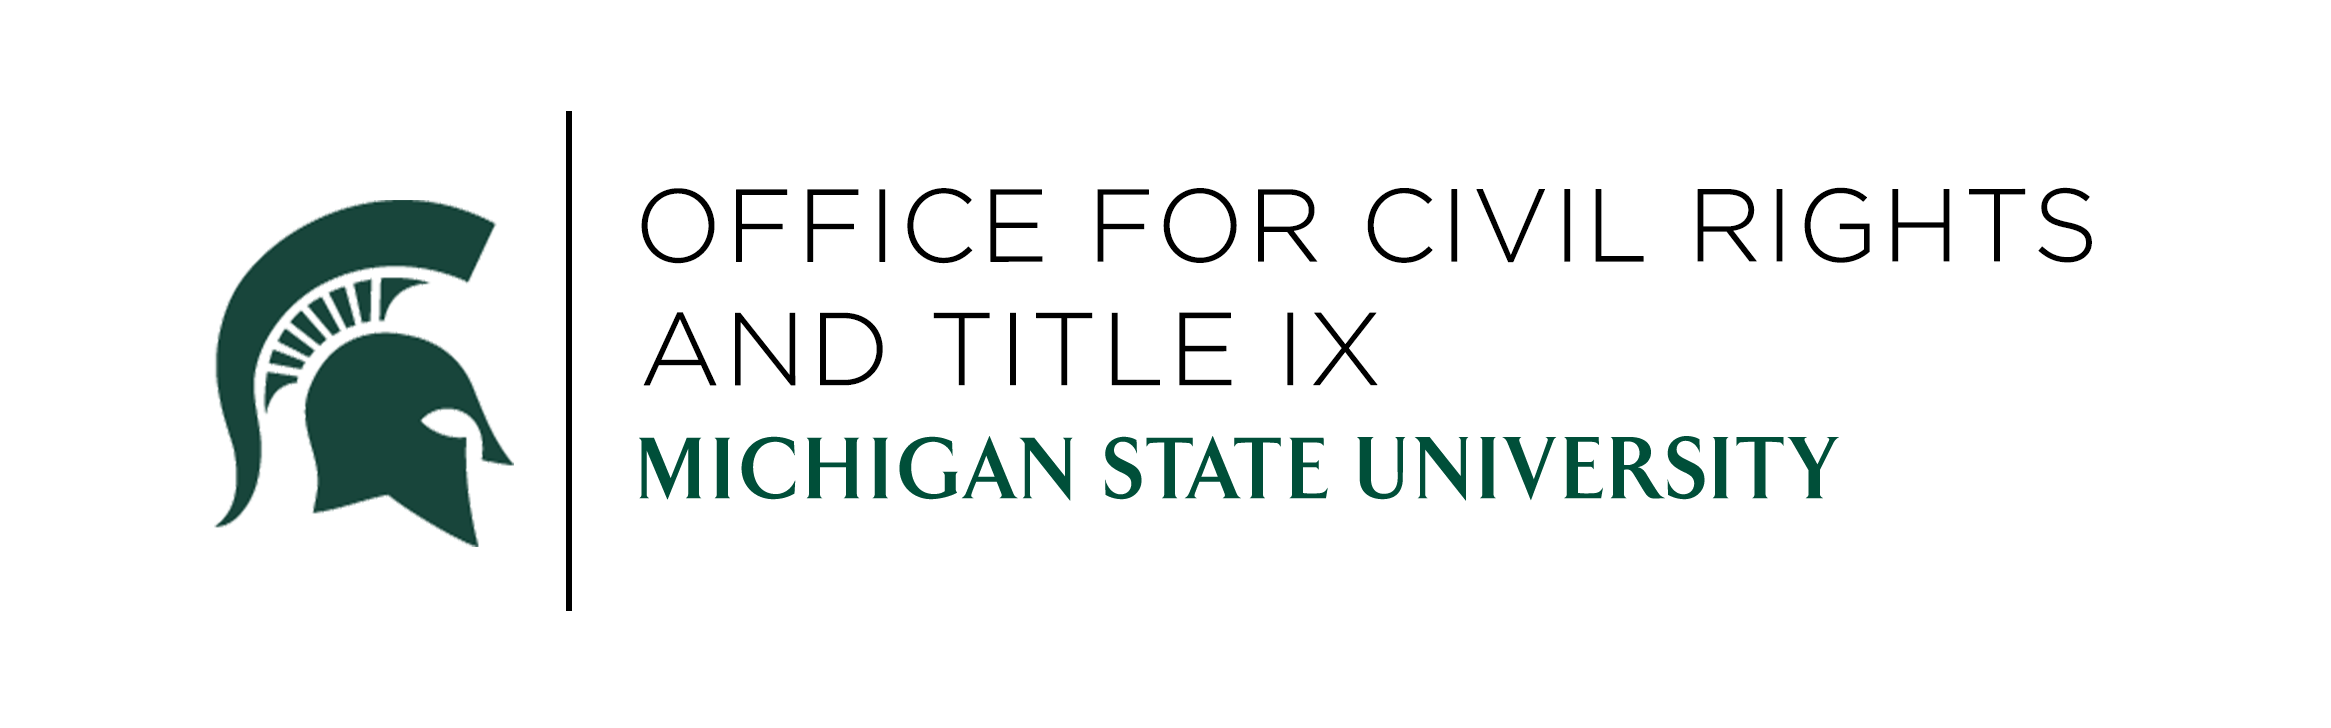 Office for Civil Rights and Title IX